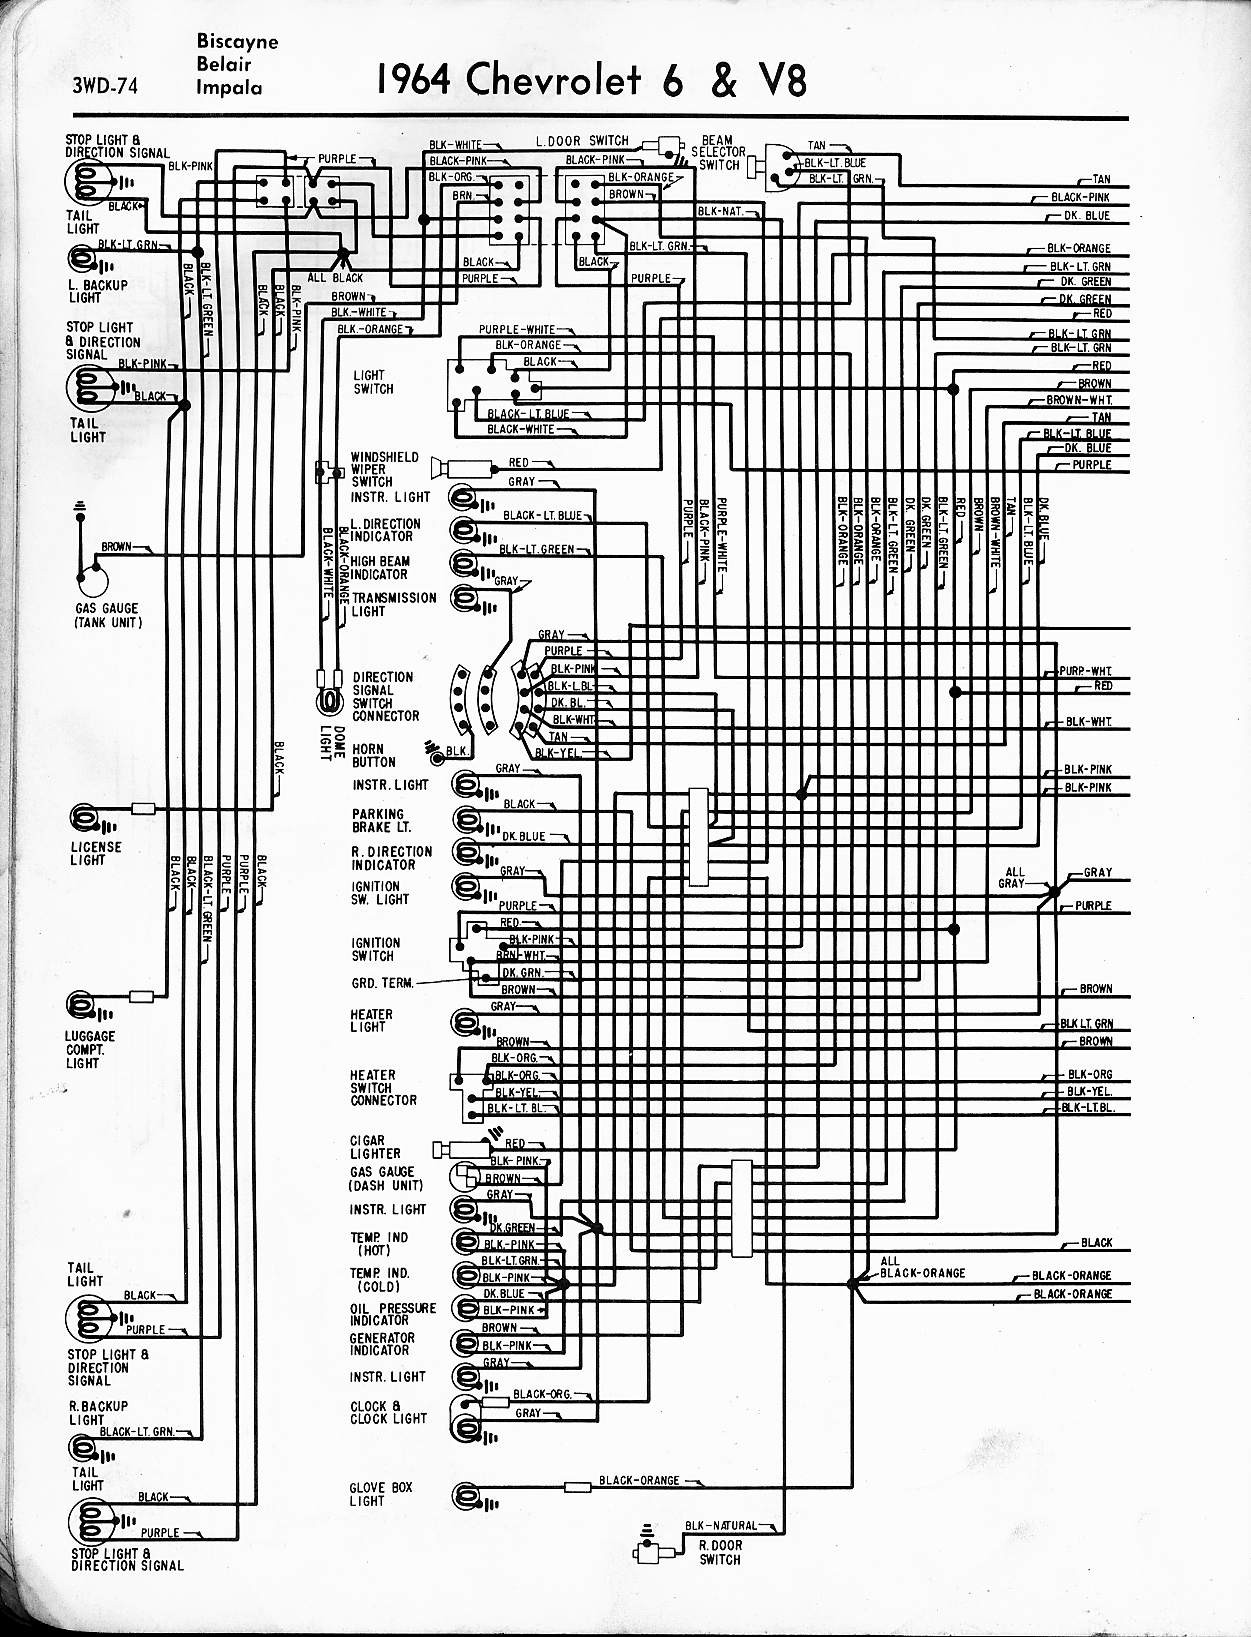 1969 Chevelle Wiring Diagram 57 65 Chevy Wiring Diagrams Of 1969 Chevelle Wiring Diagram